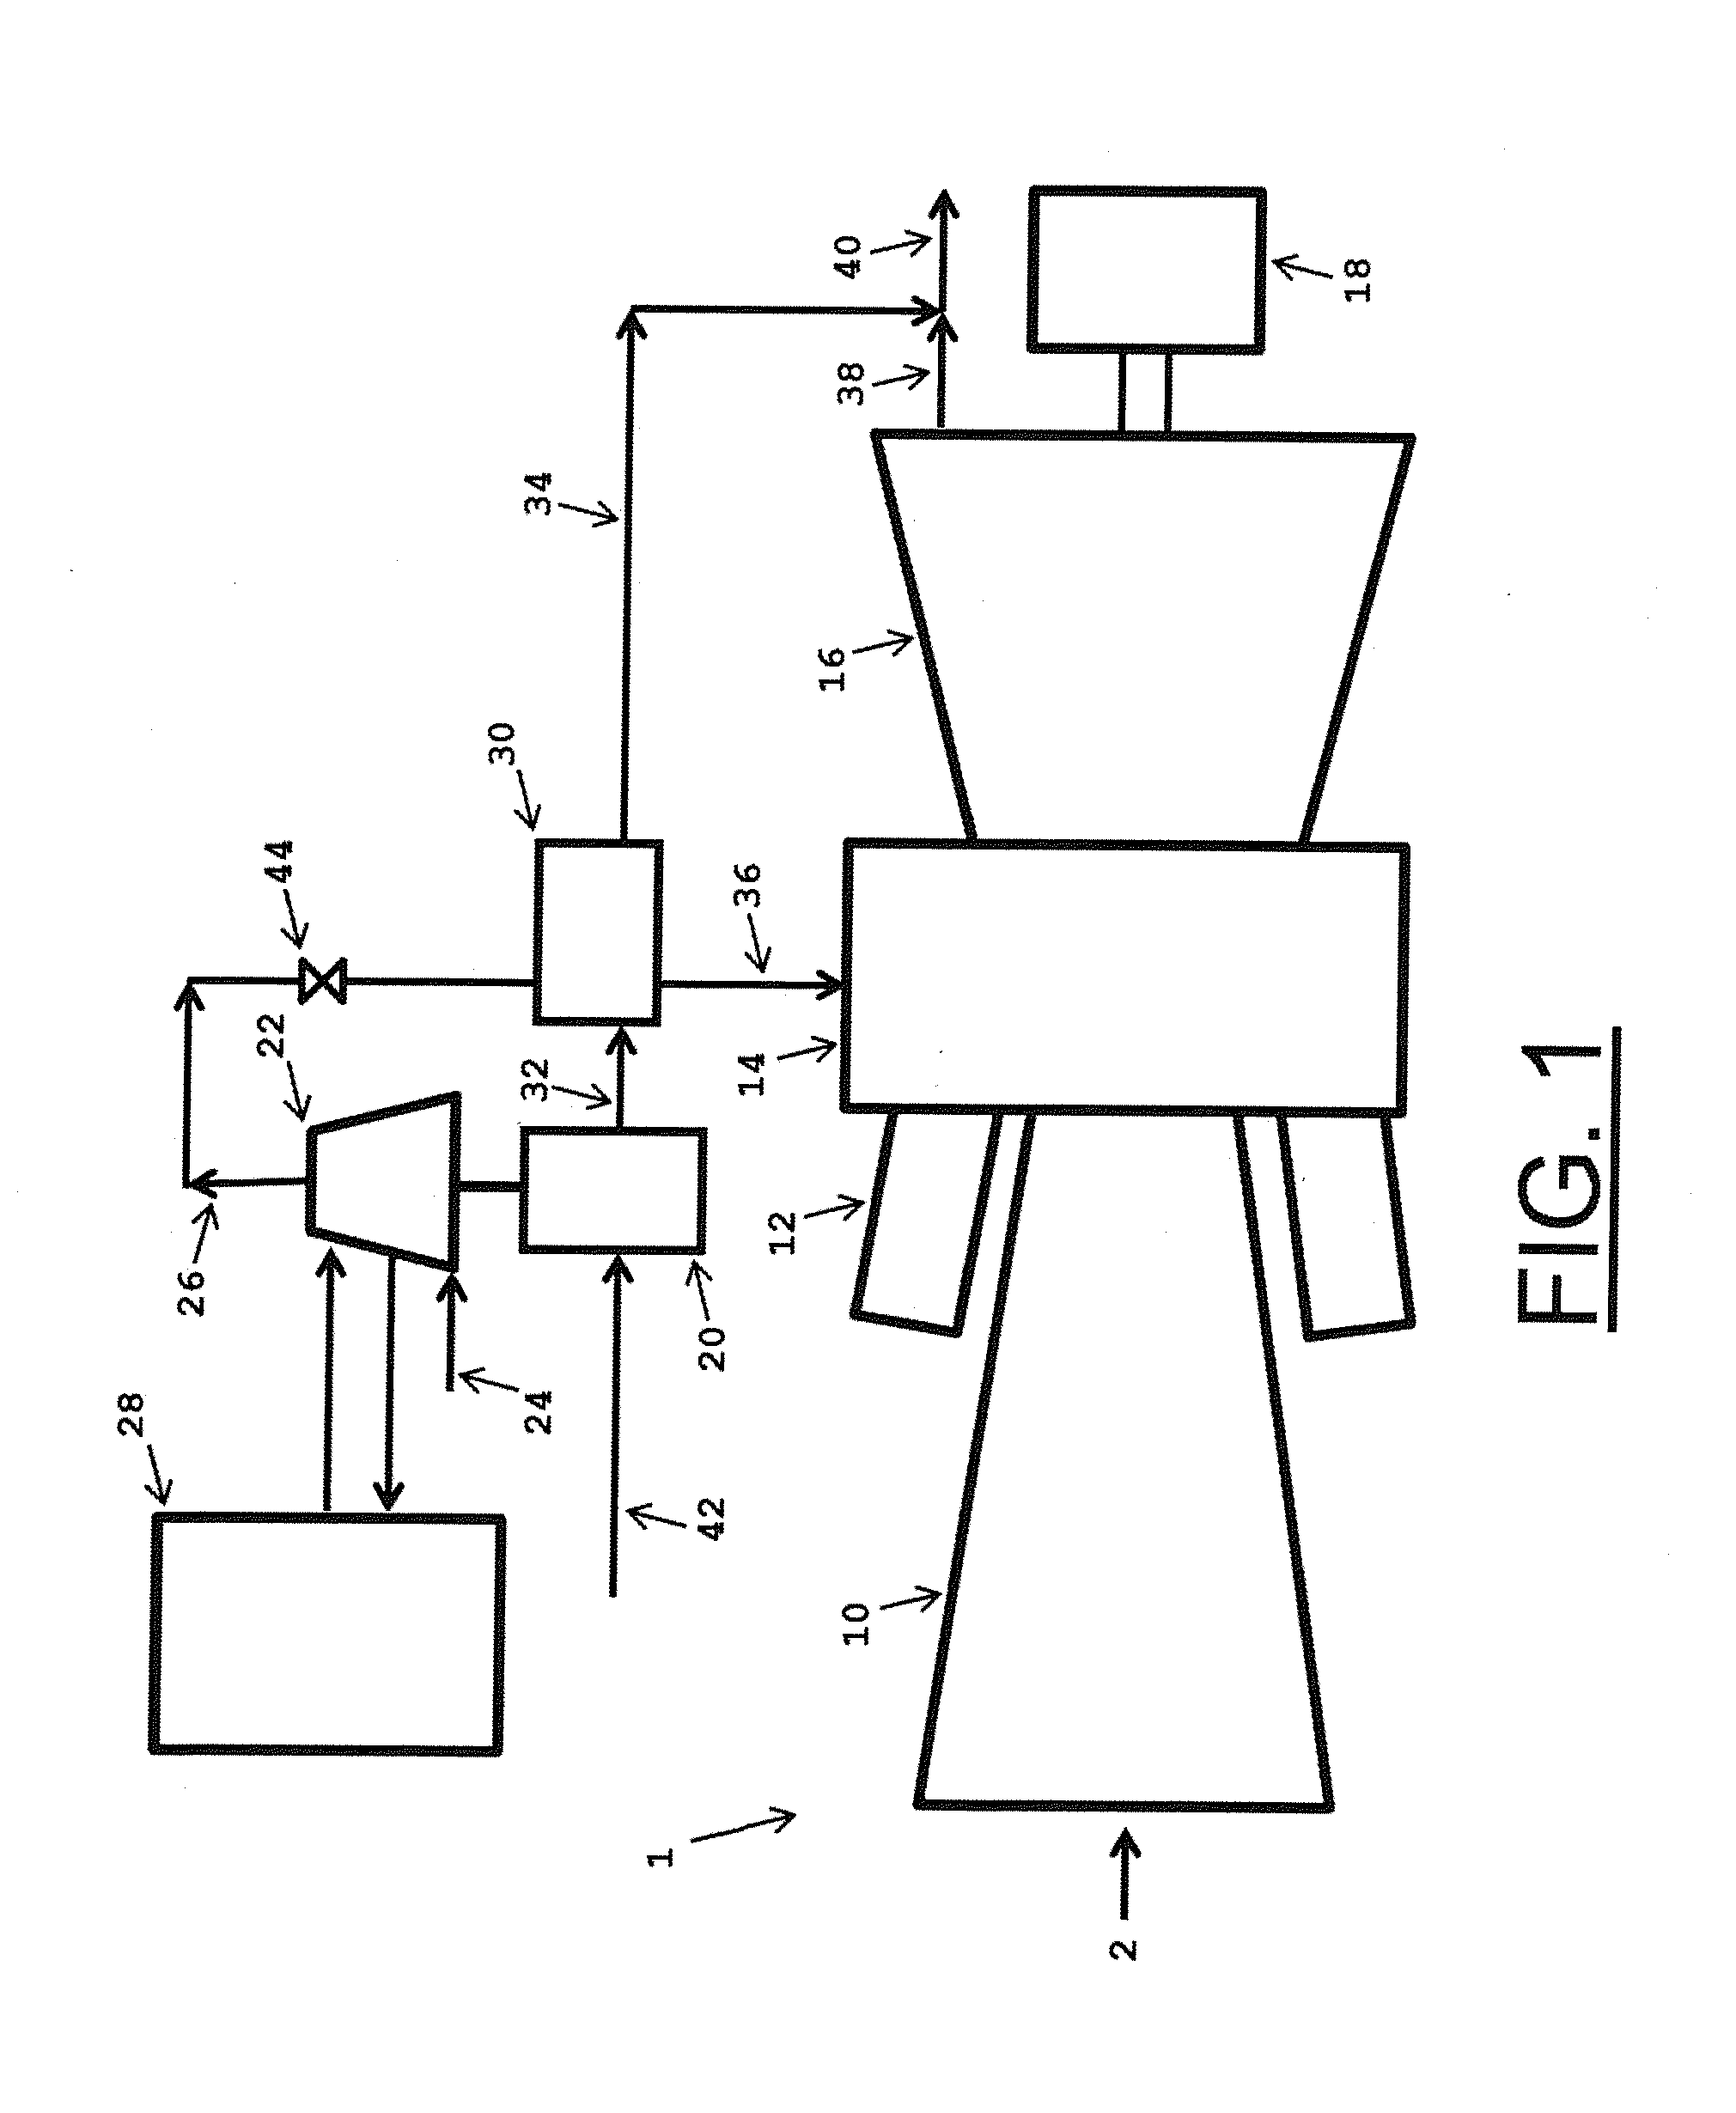 Gas turbine air injection system control and method of operation